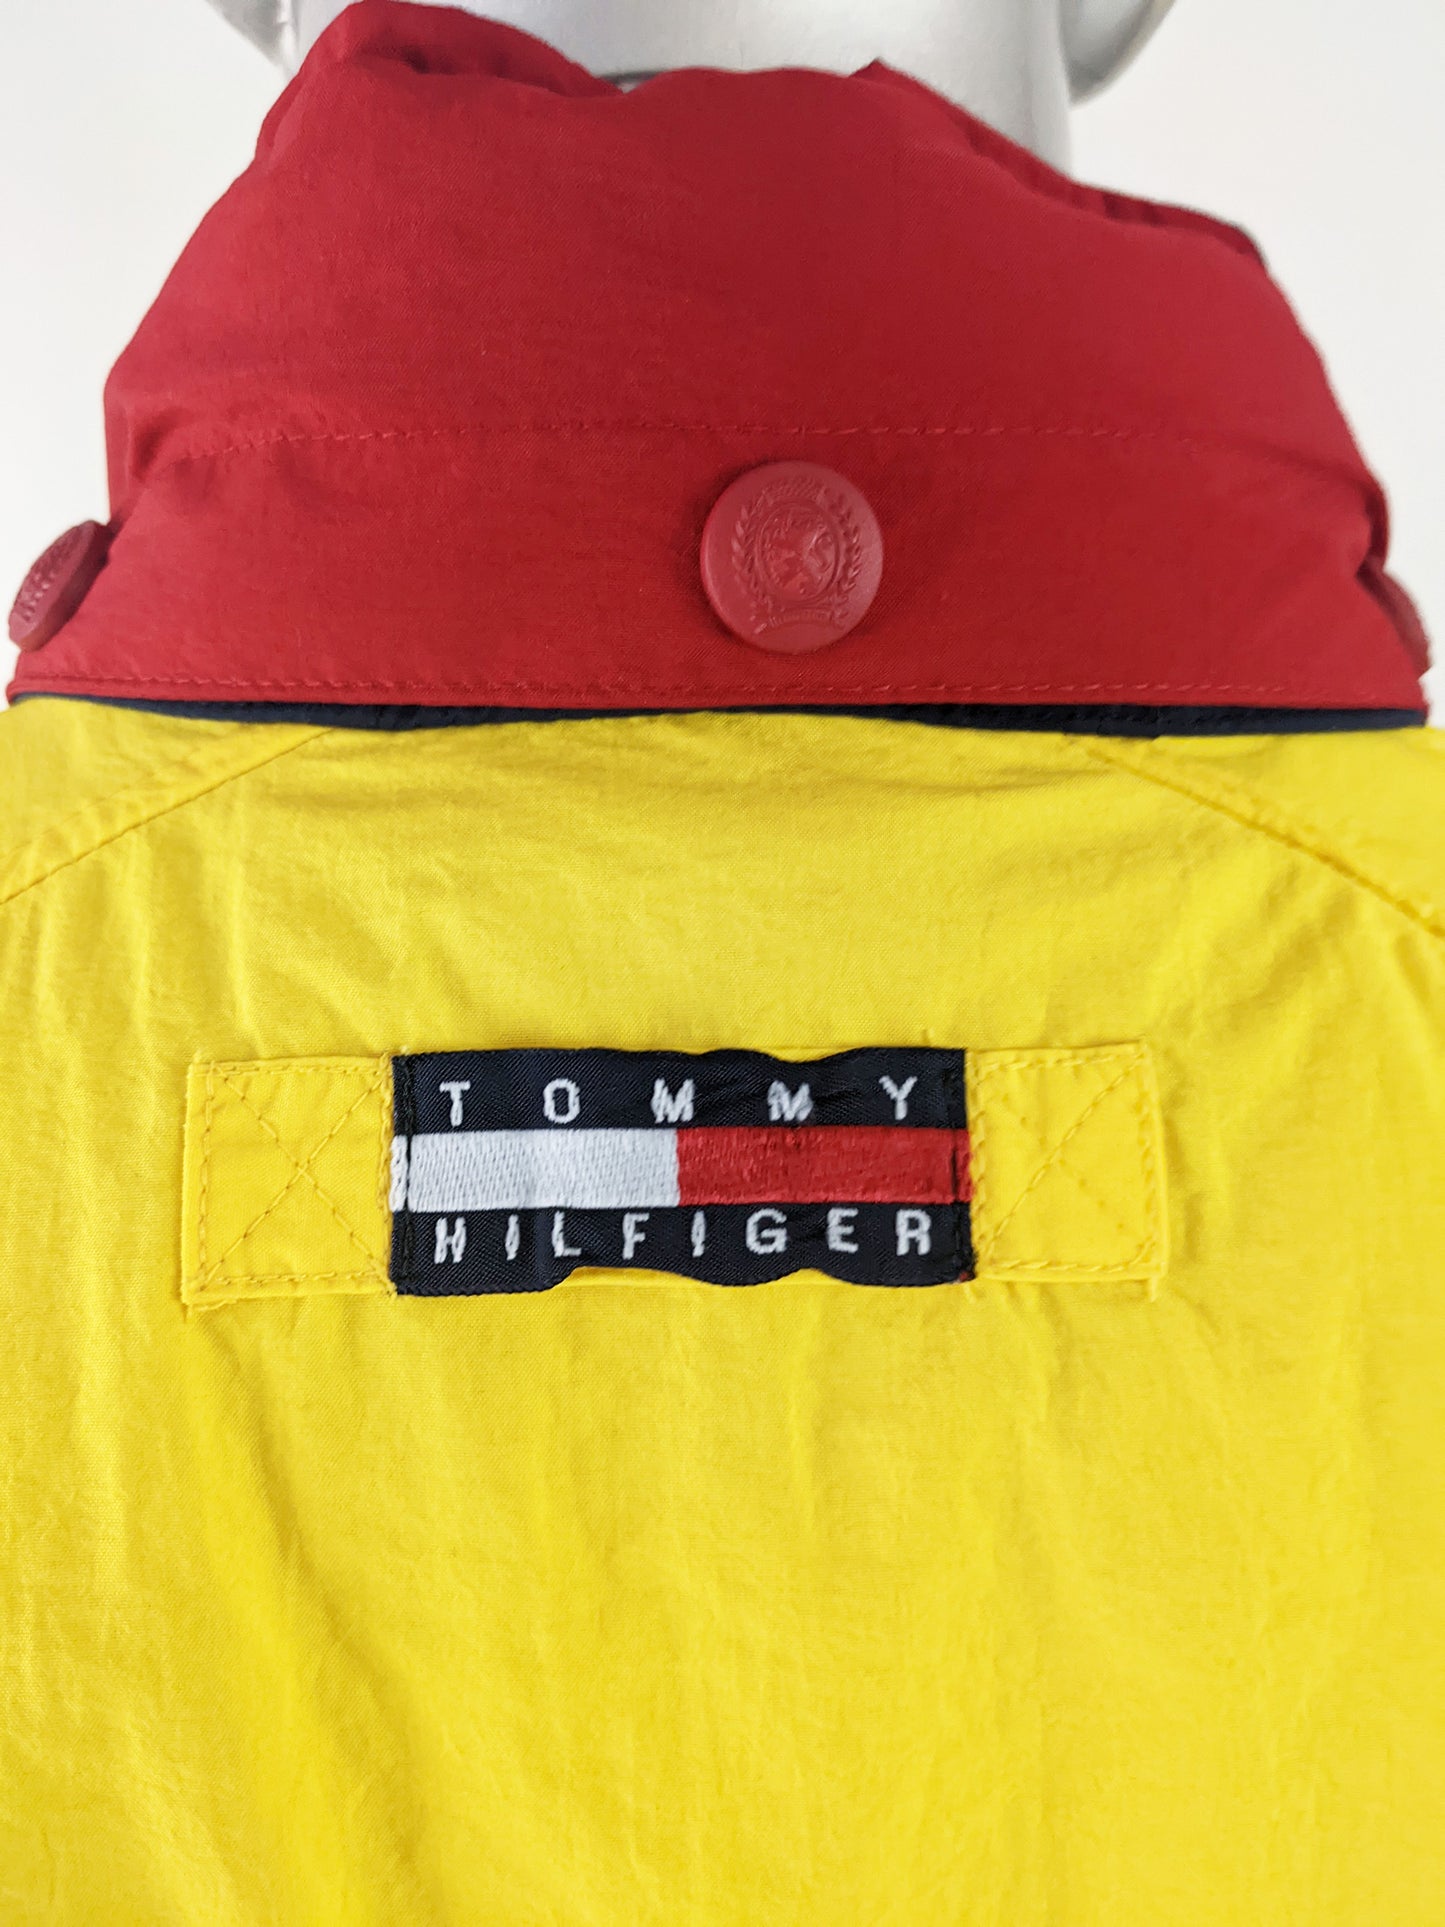 Tommy Hilfiger Vintage Mens Yellow Sailing Style Jacket, 1990s